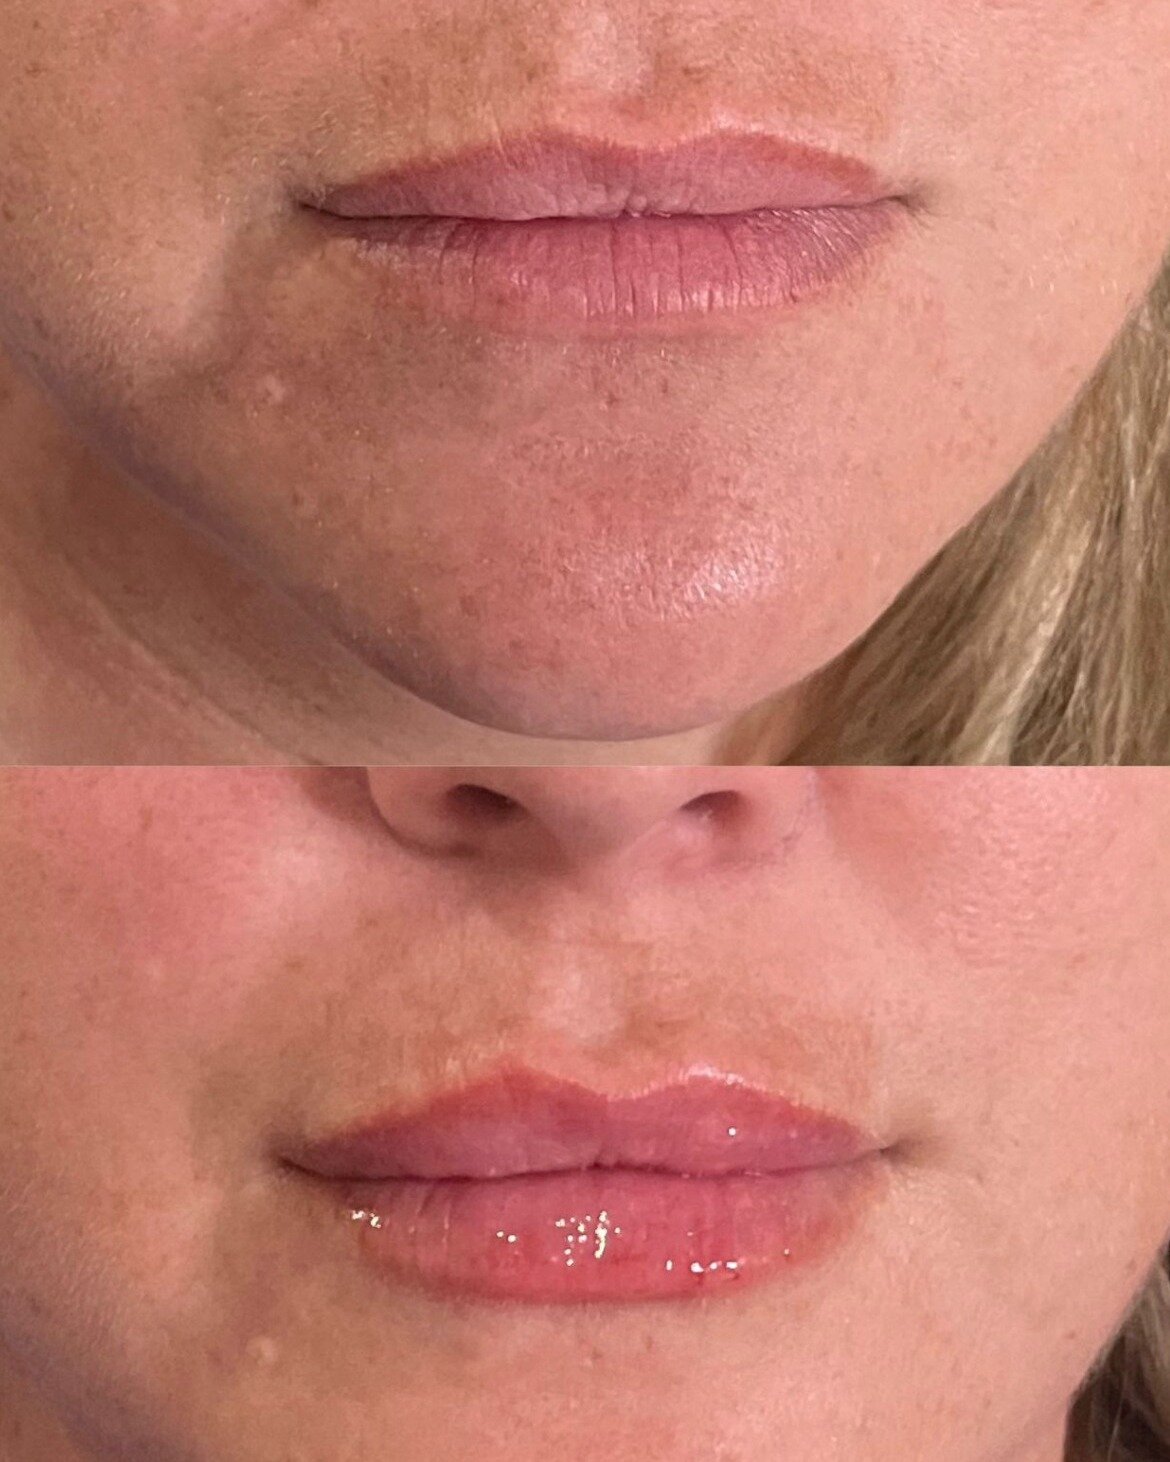 Lip Refresh - Close Up... and of course unedited. By the way at SLB we take all the photos with client upright to give a more true representation of what the lips look like in day to day life.

I mean the crisp borders on this lip, the beautiful bala